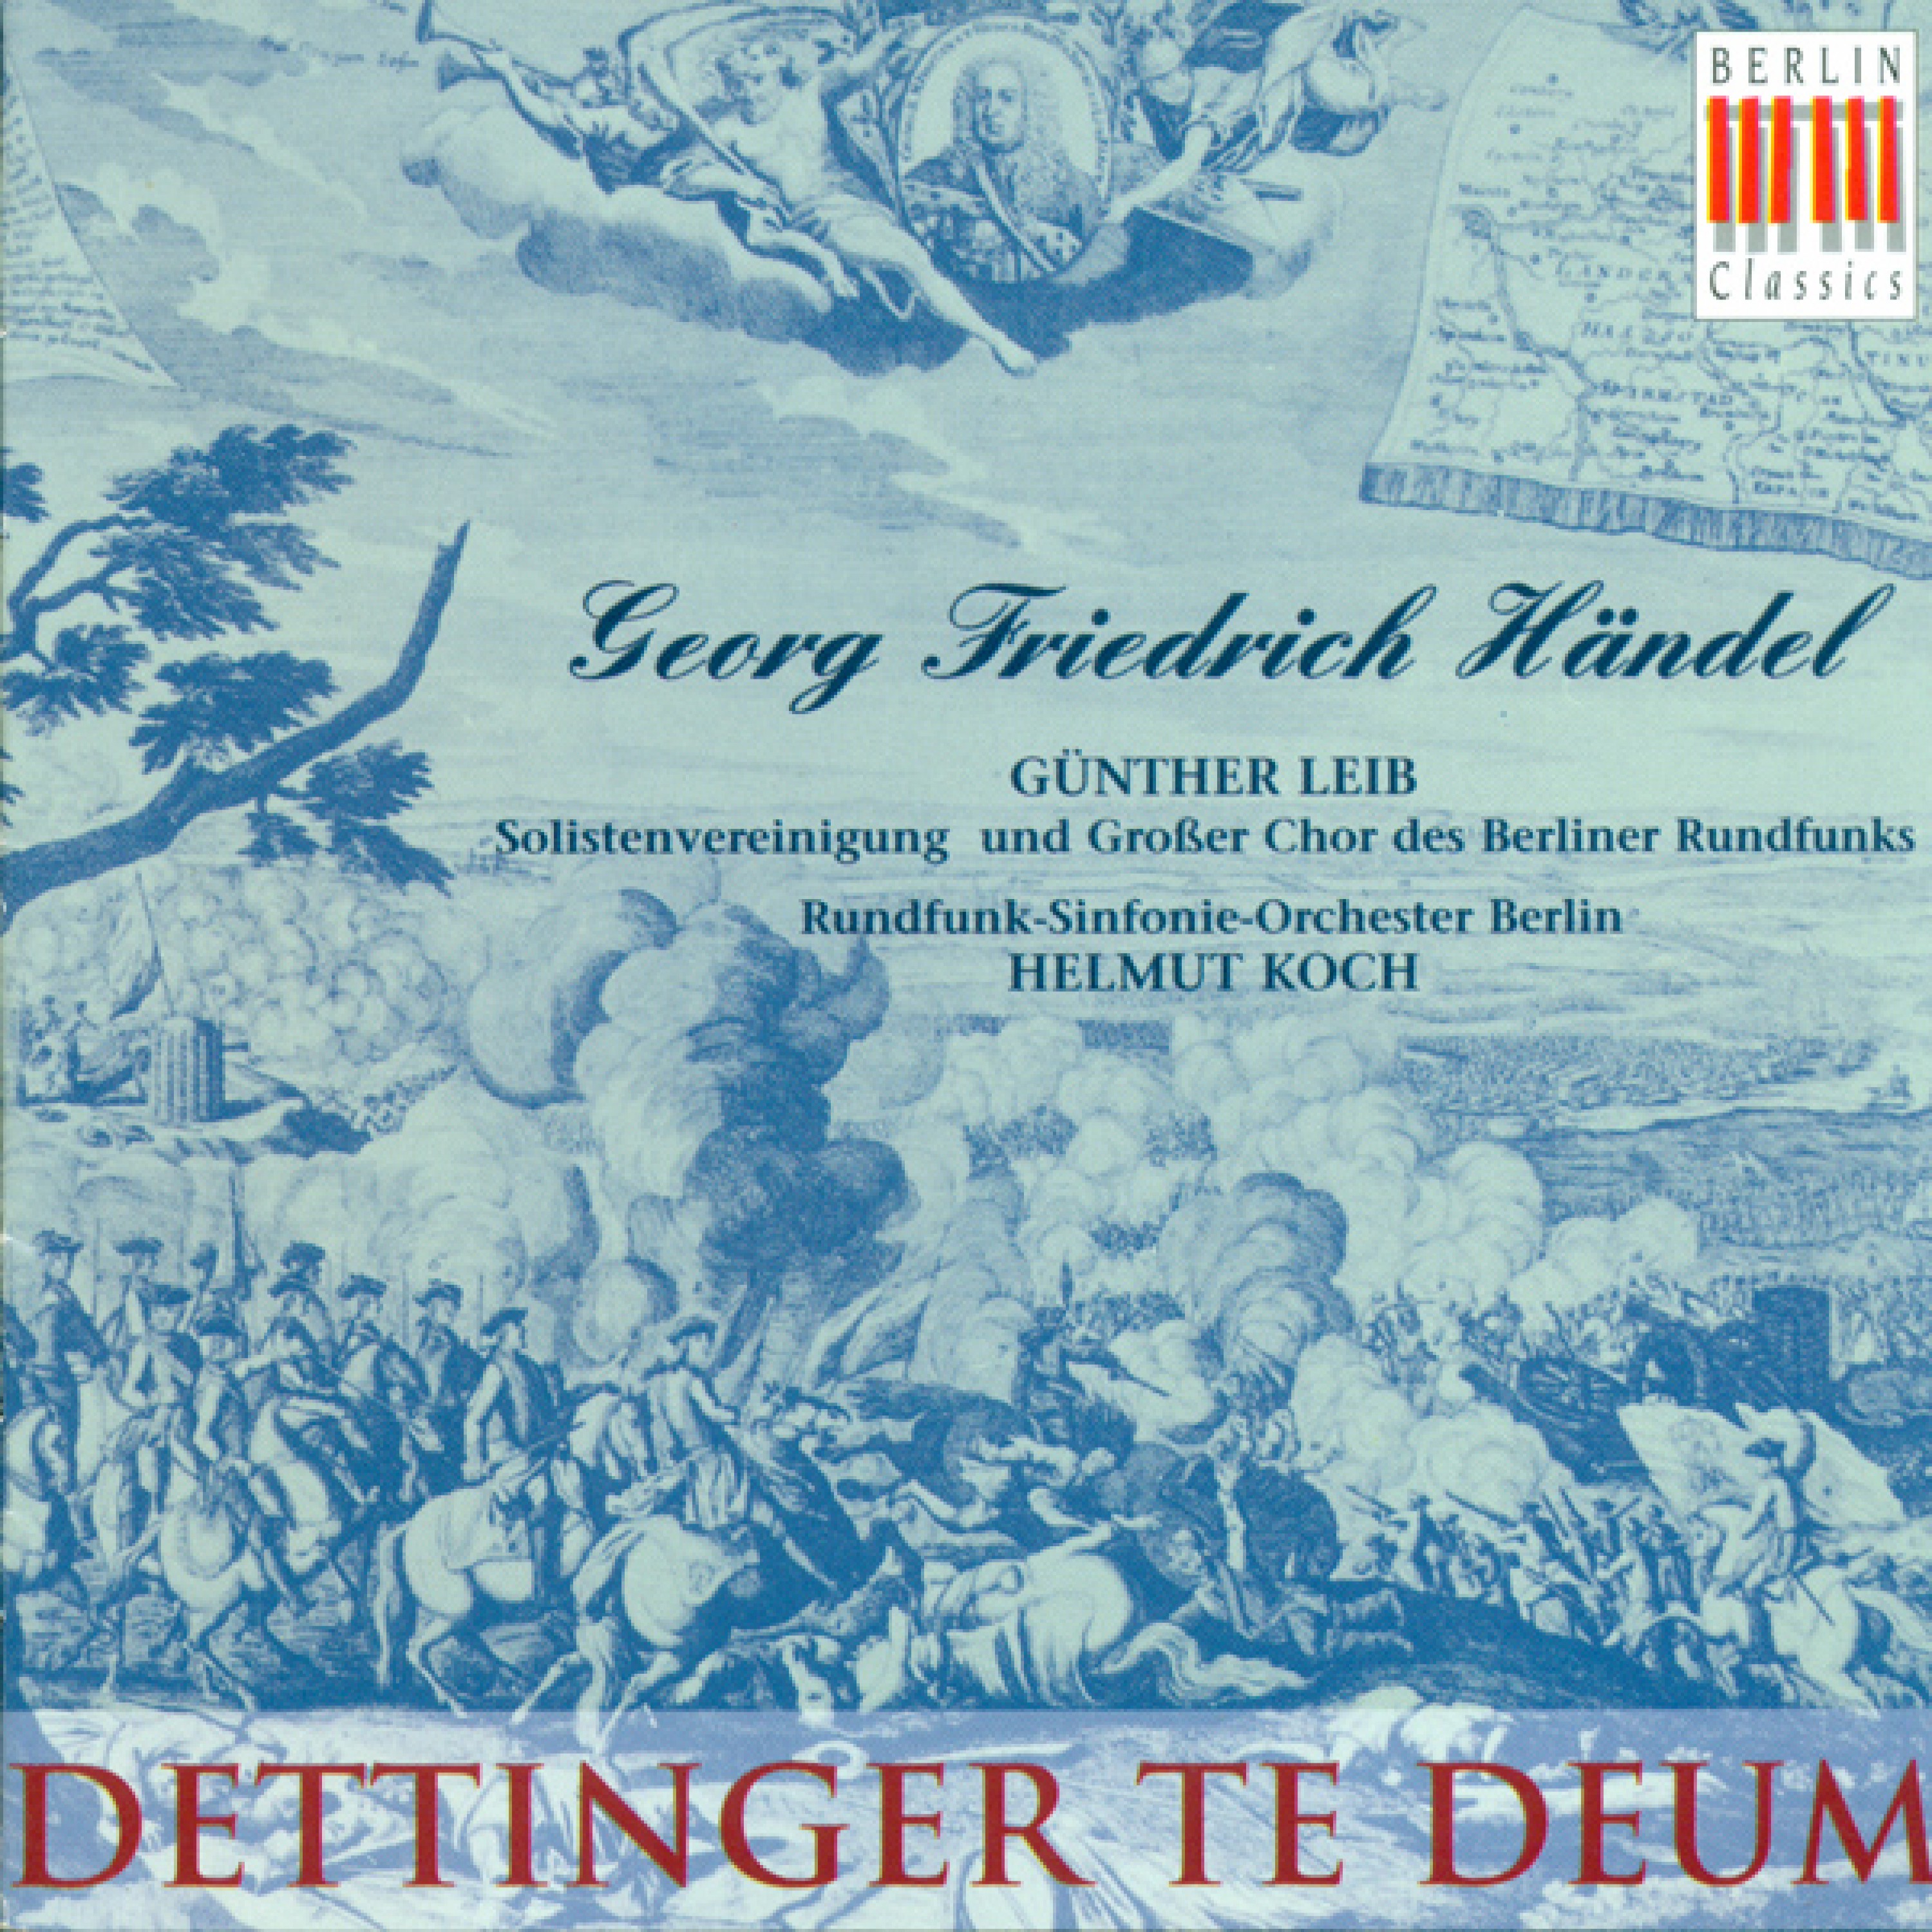 Te Deum in D major, HWV 283, "Dettingen": Day by day we magnify Thee